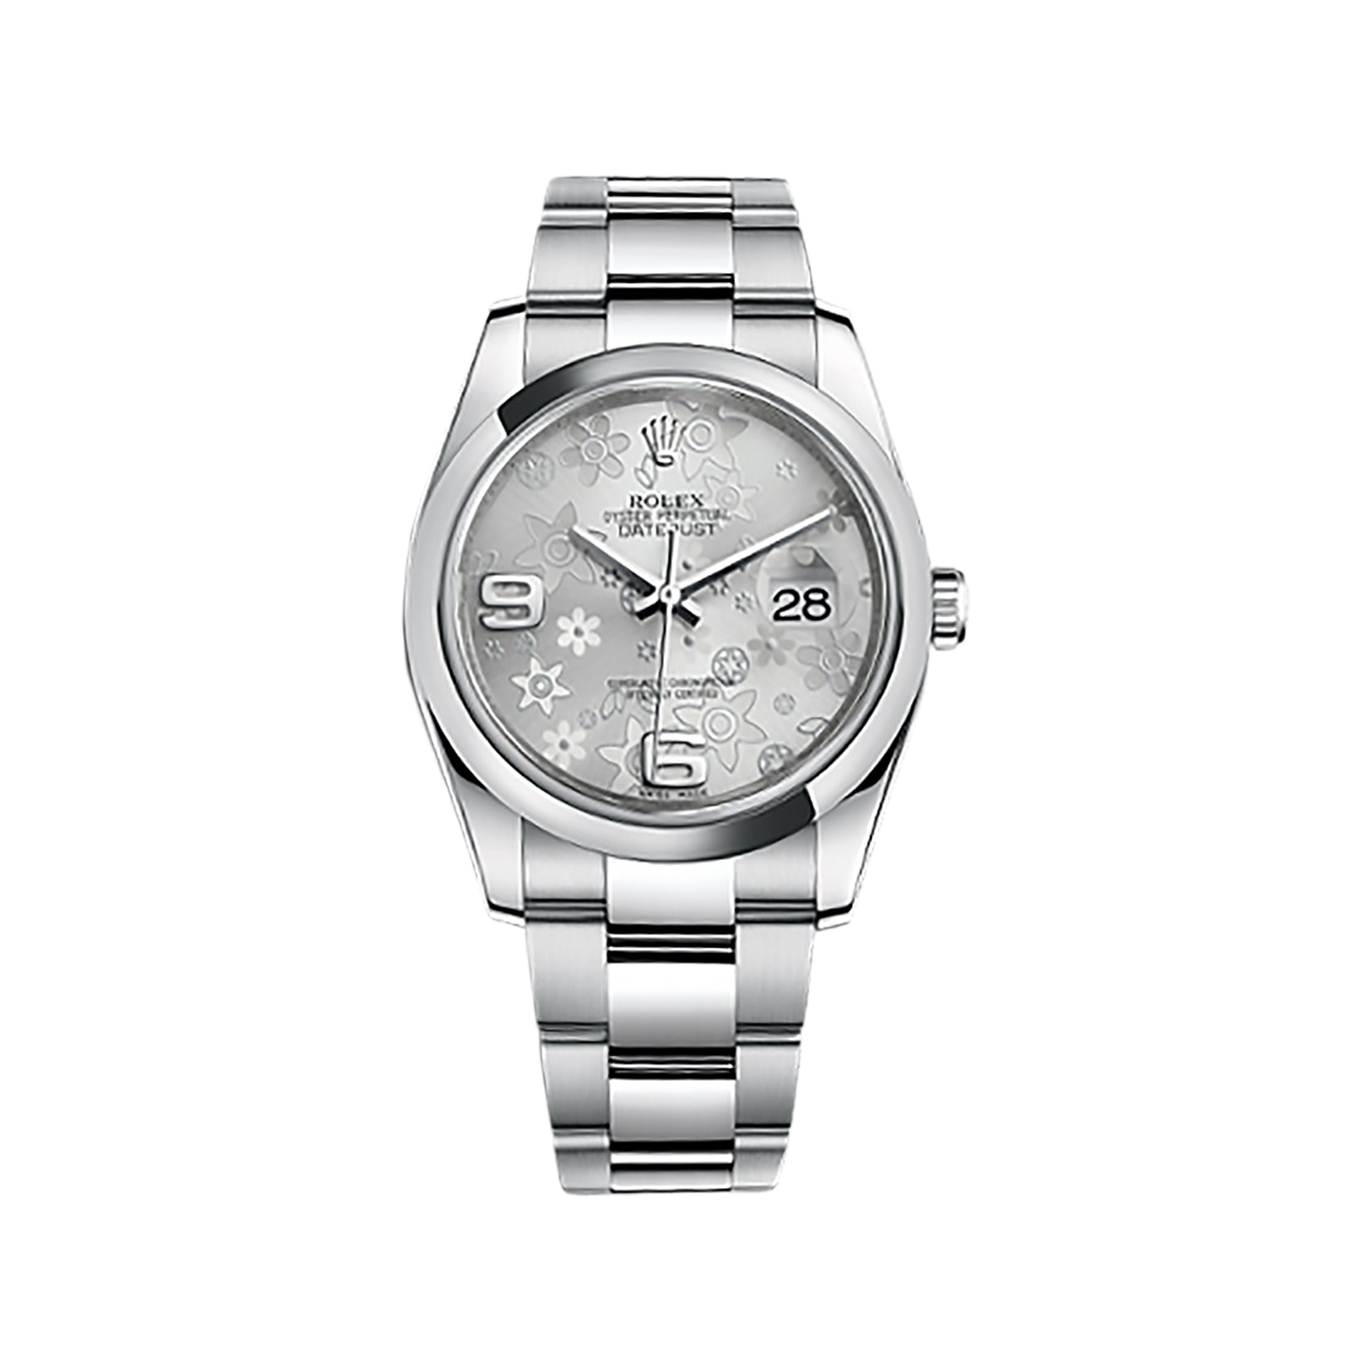 Datejust 36 116200 Stainless Steel Watch (Silver Floral Motif)